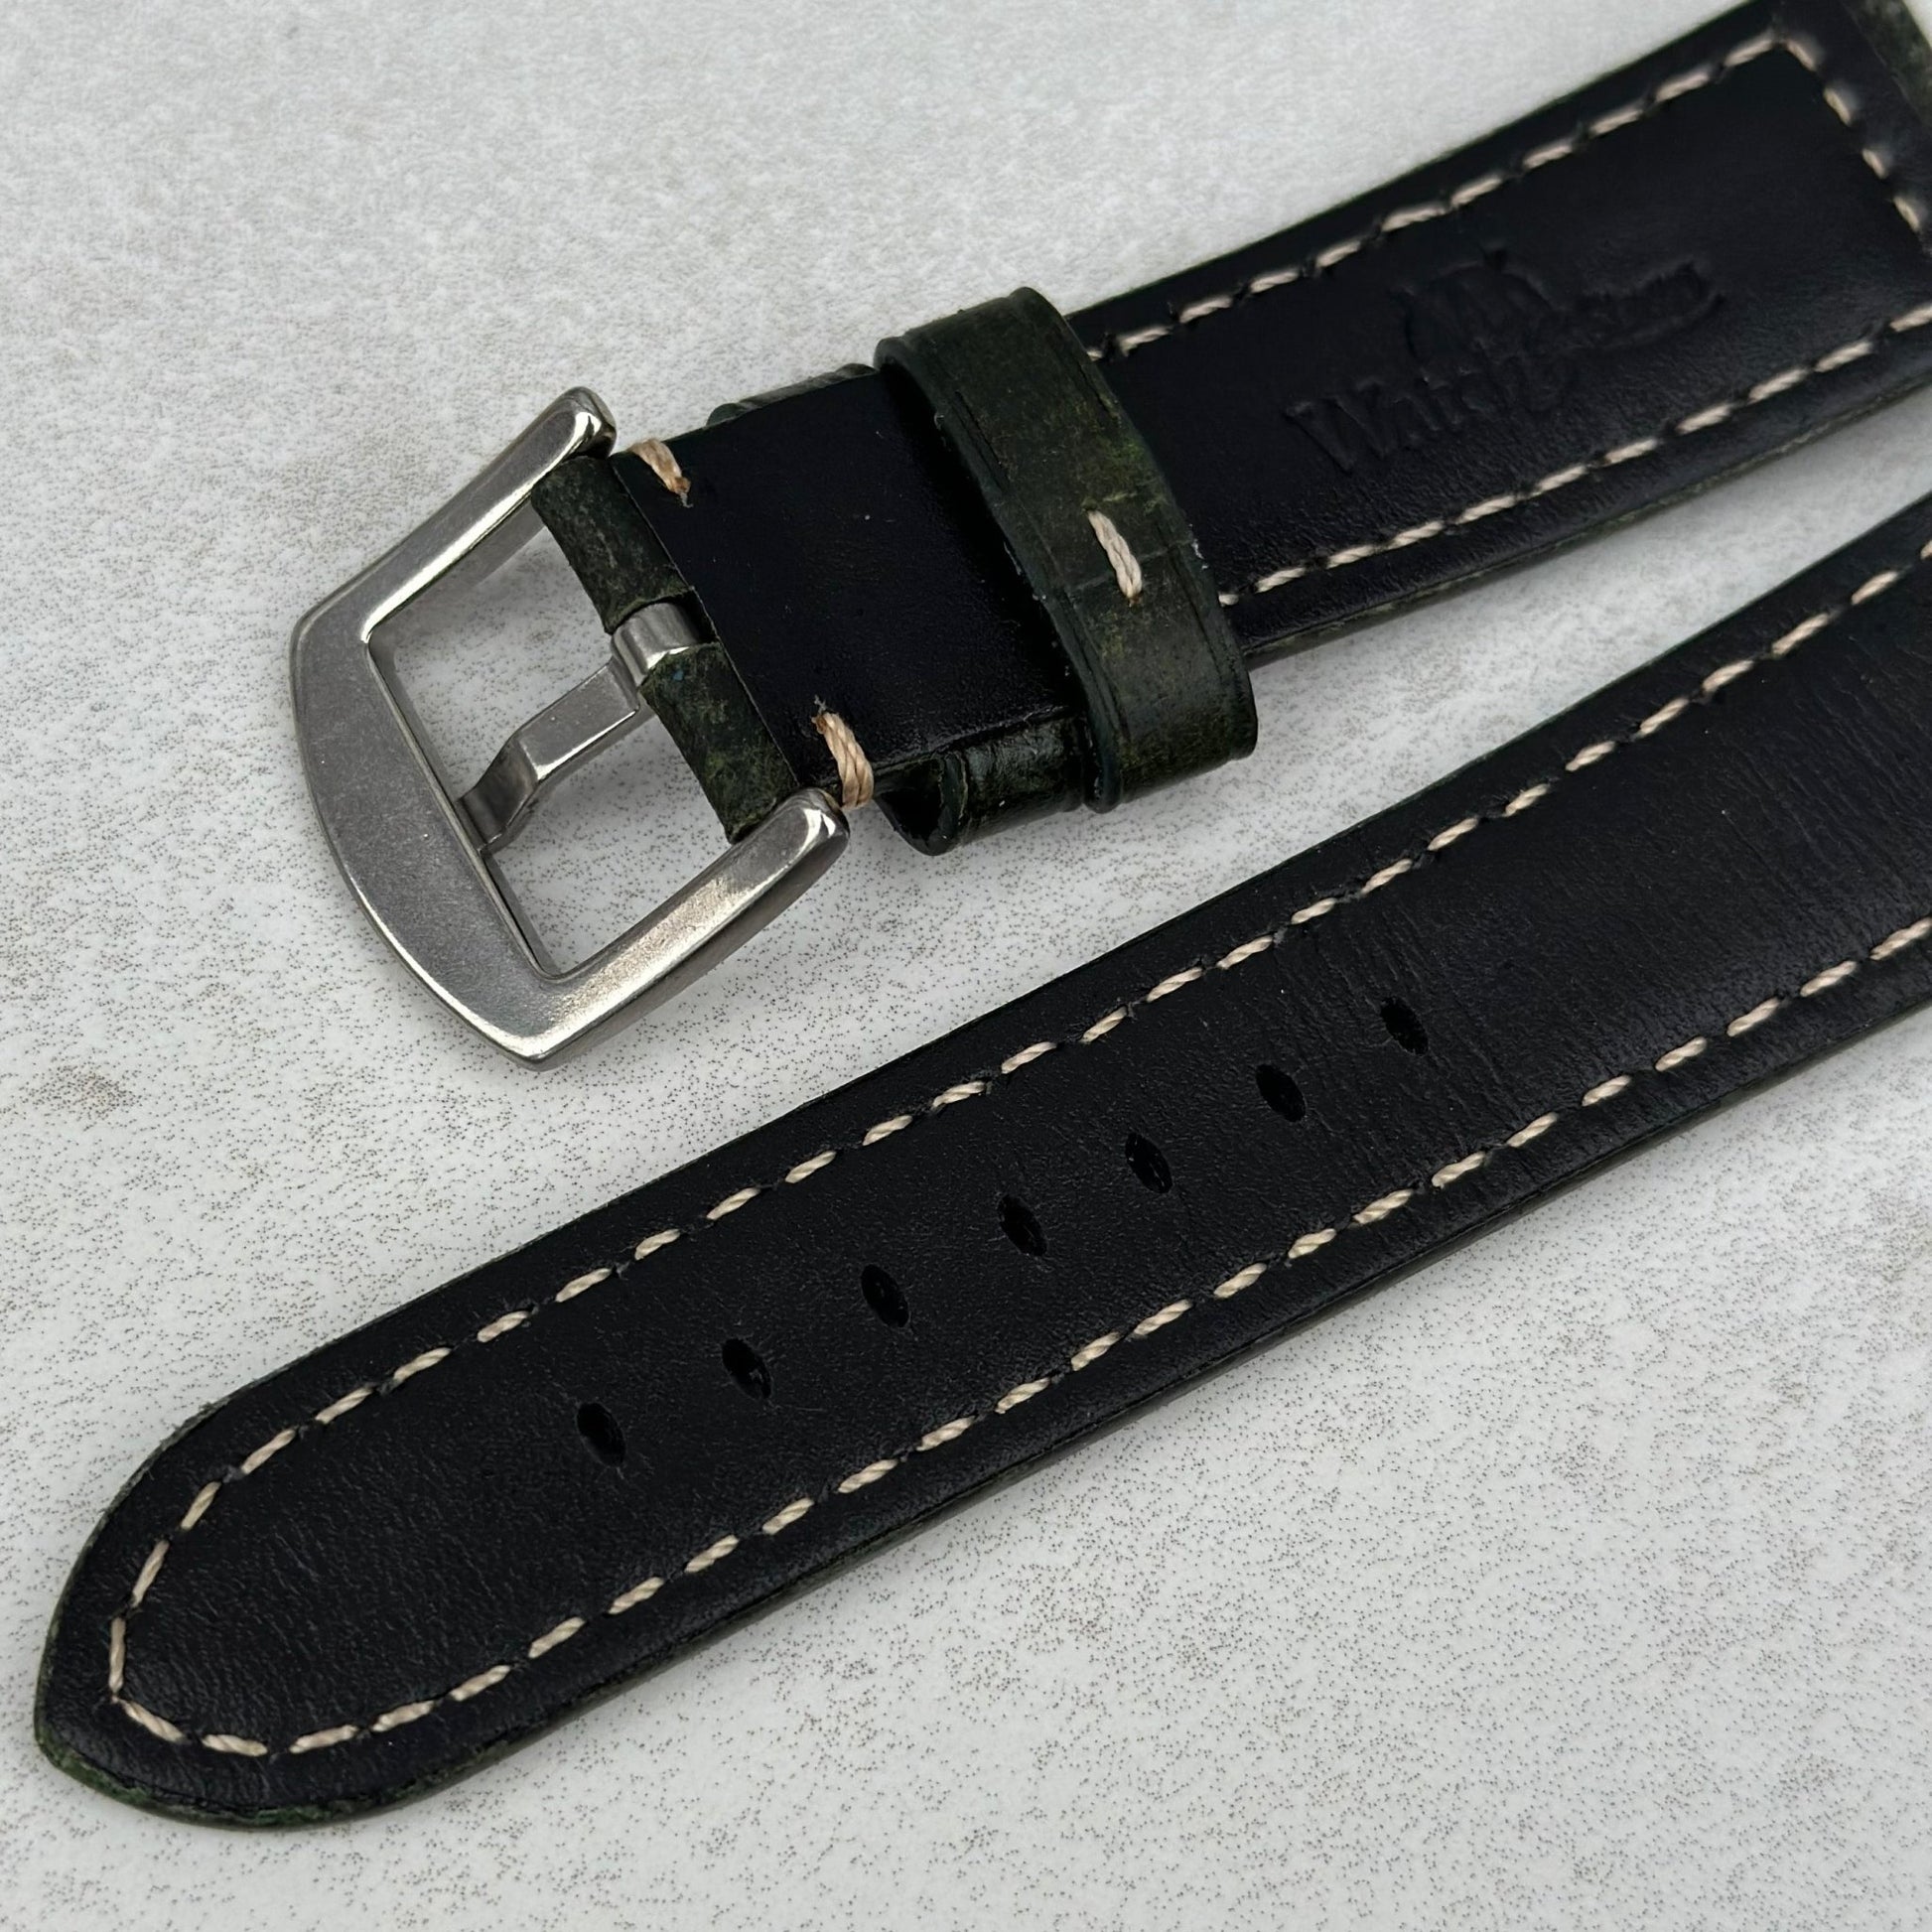 Rear buckle of the Berlin green full grain leather watch strap. Watch And Strap.